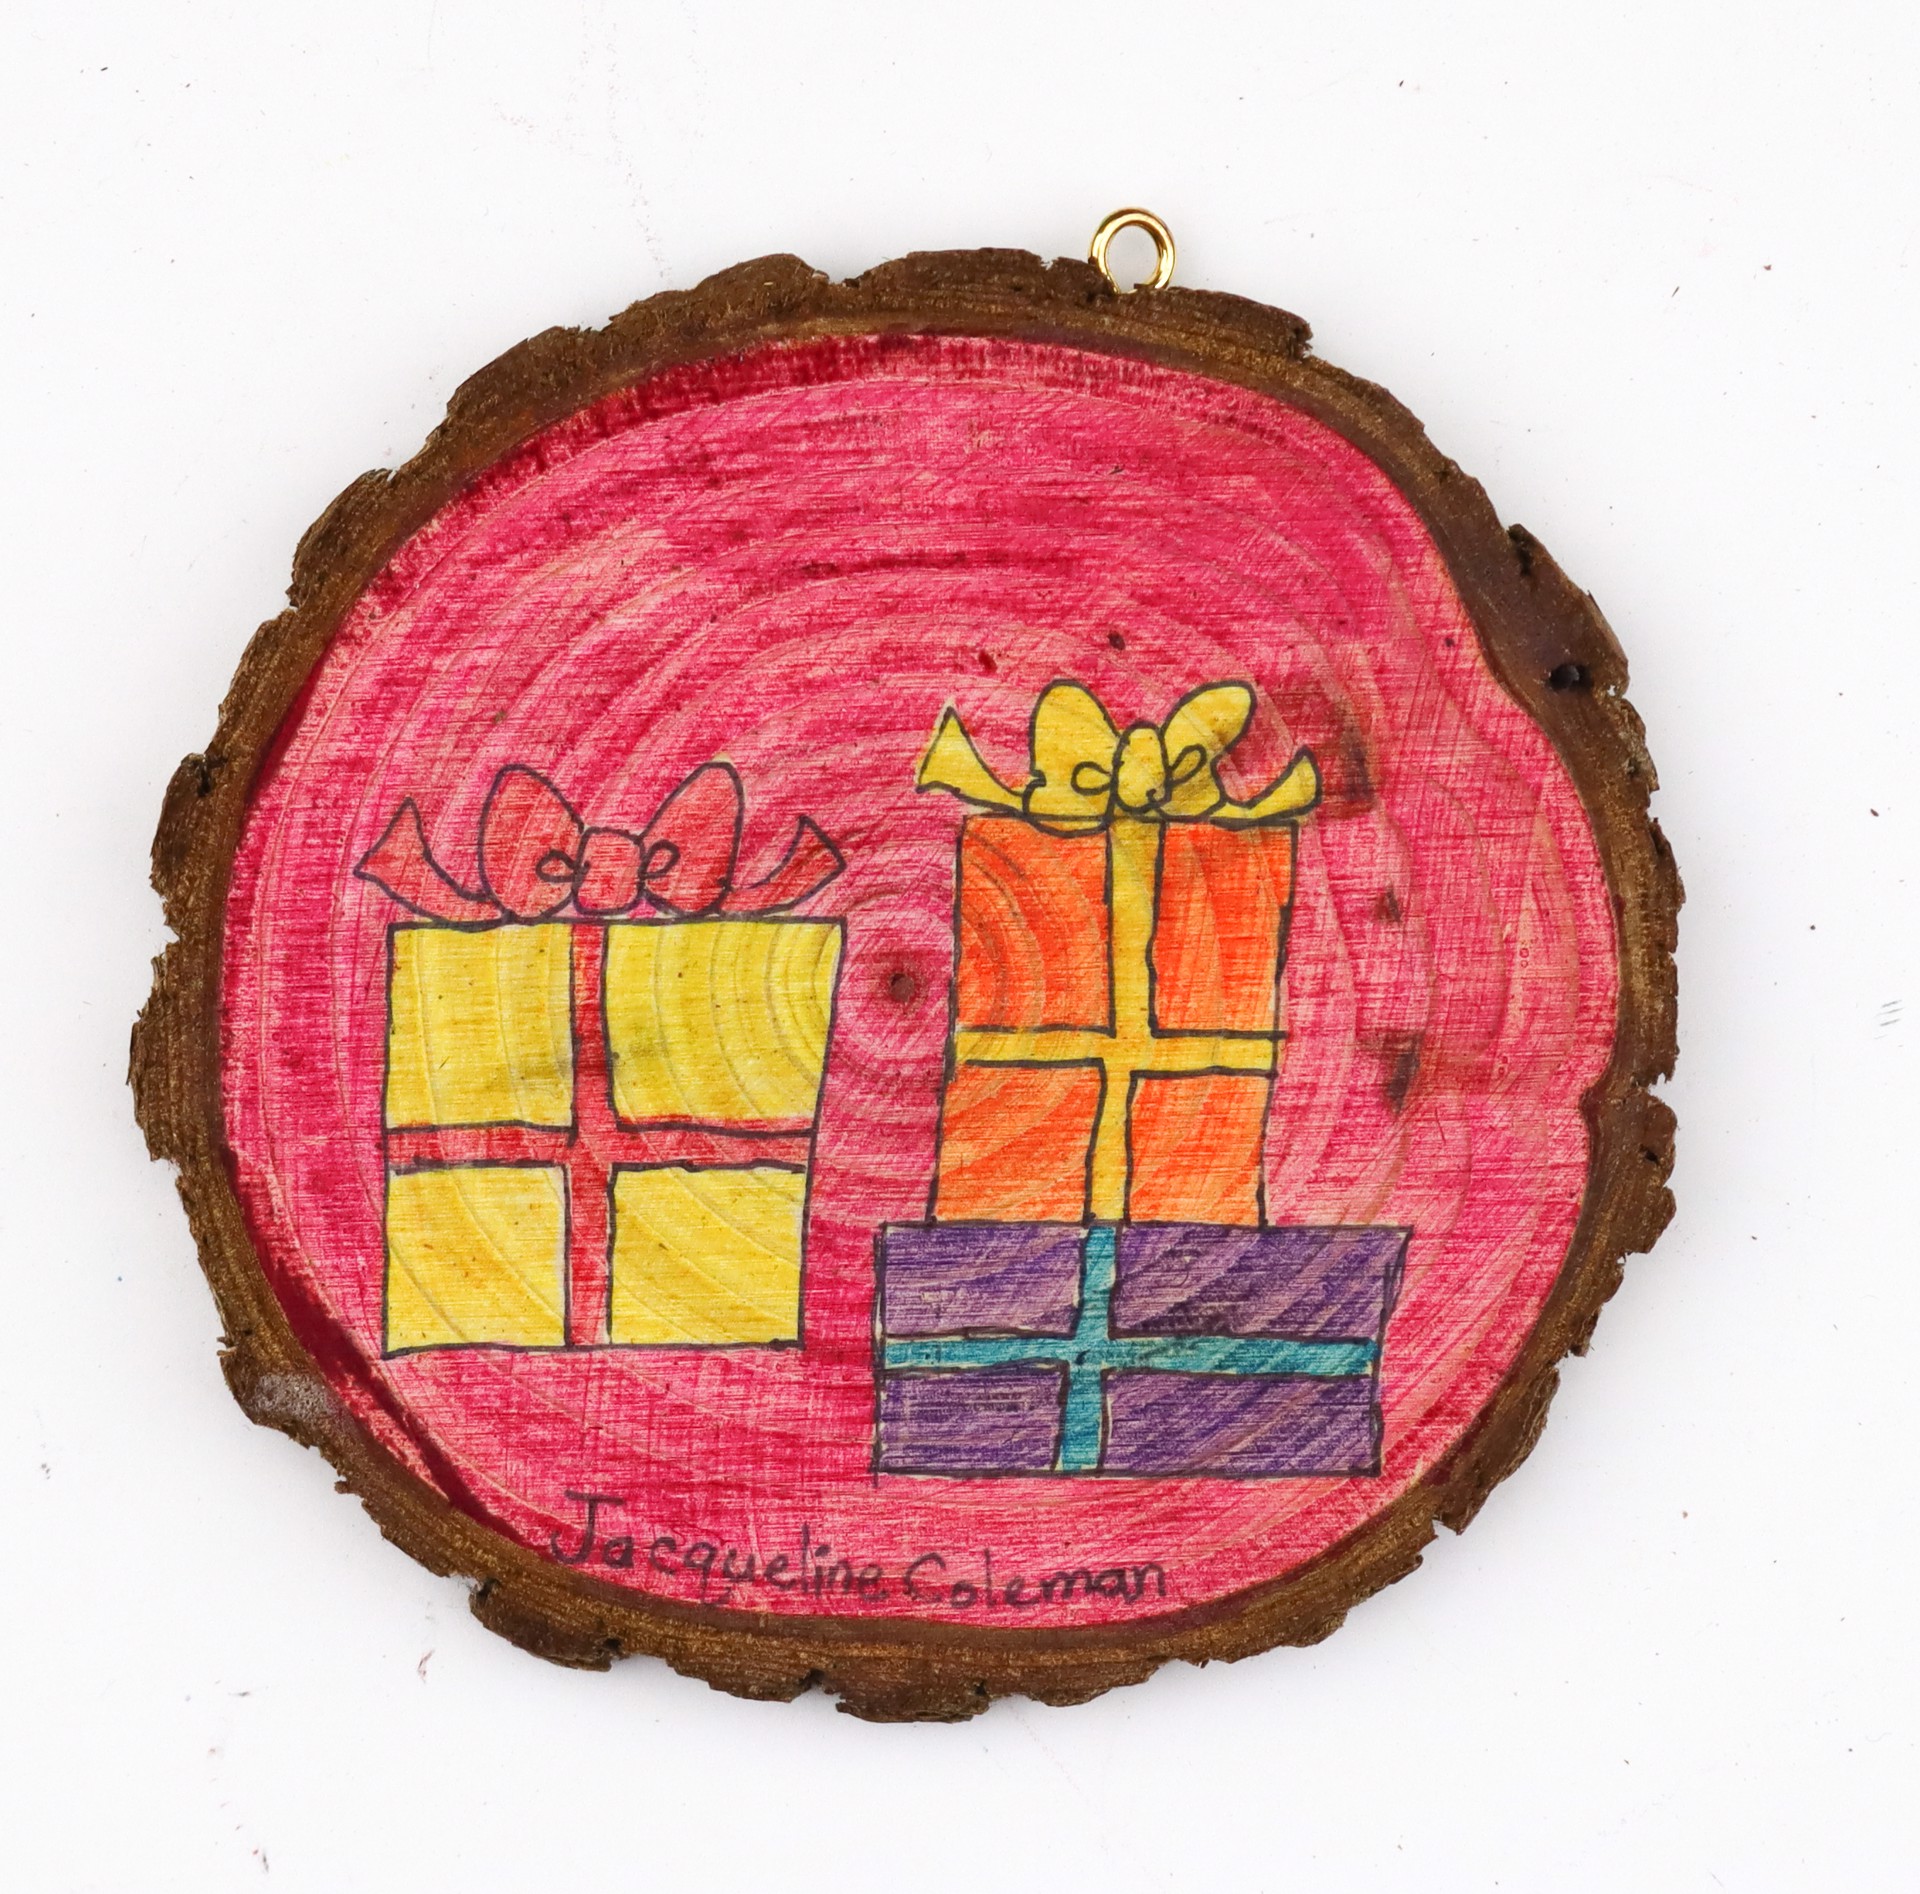 Wreath/Gifts (ornament) by Jacqueline Coleman